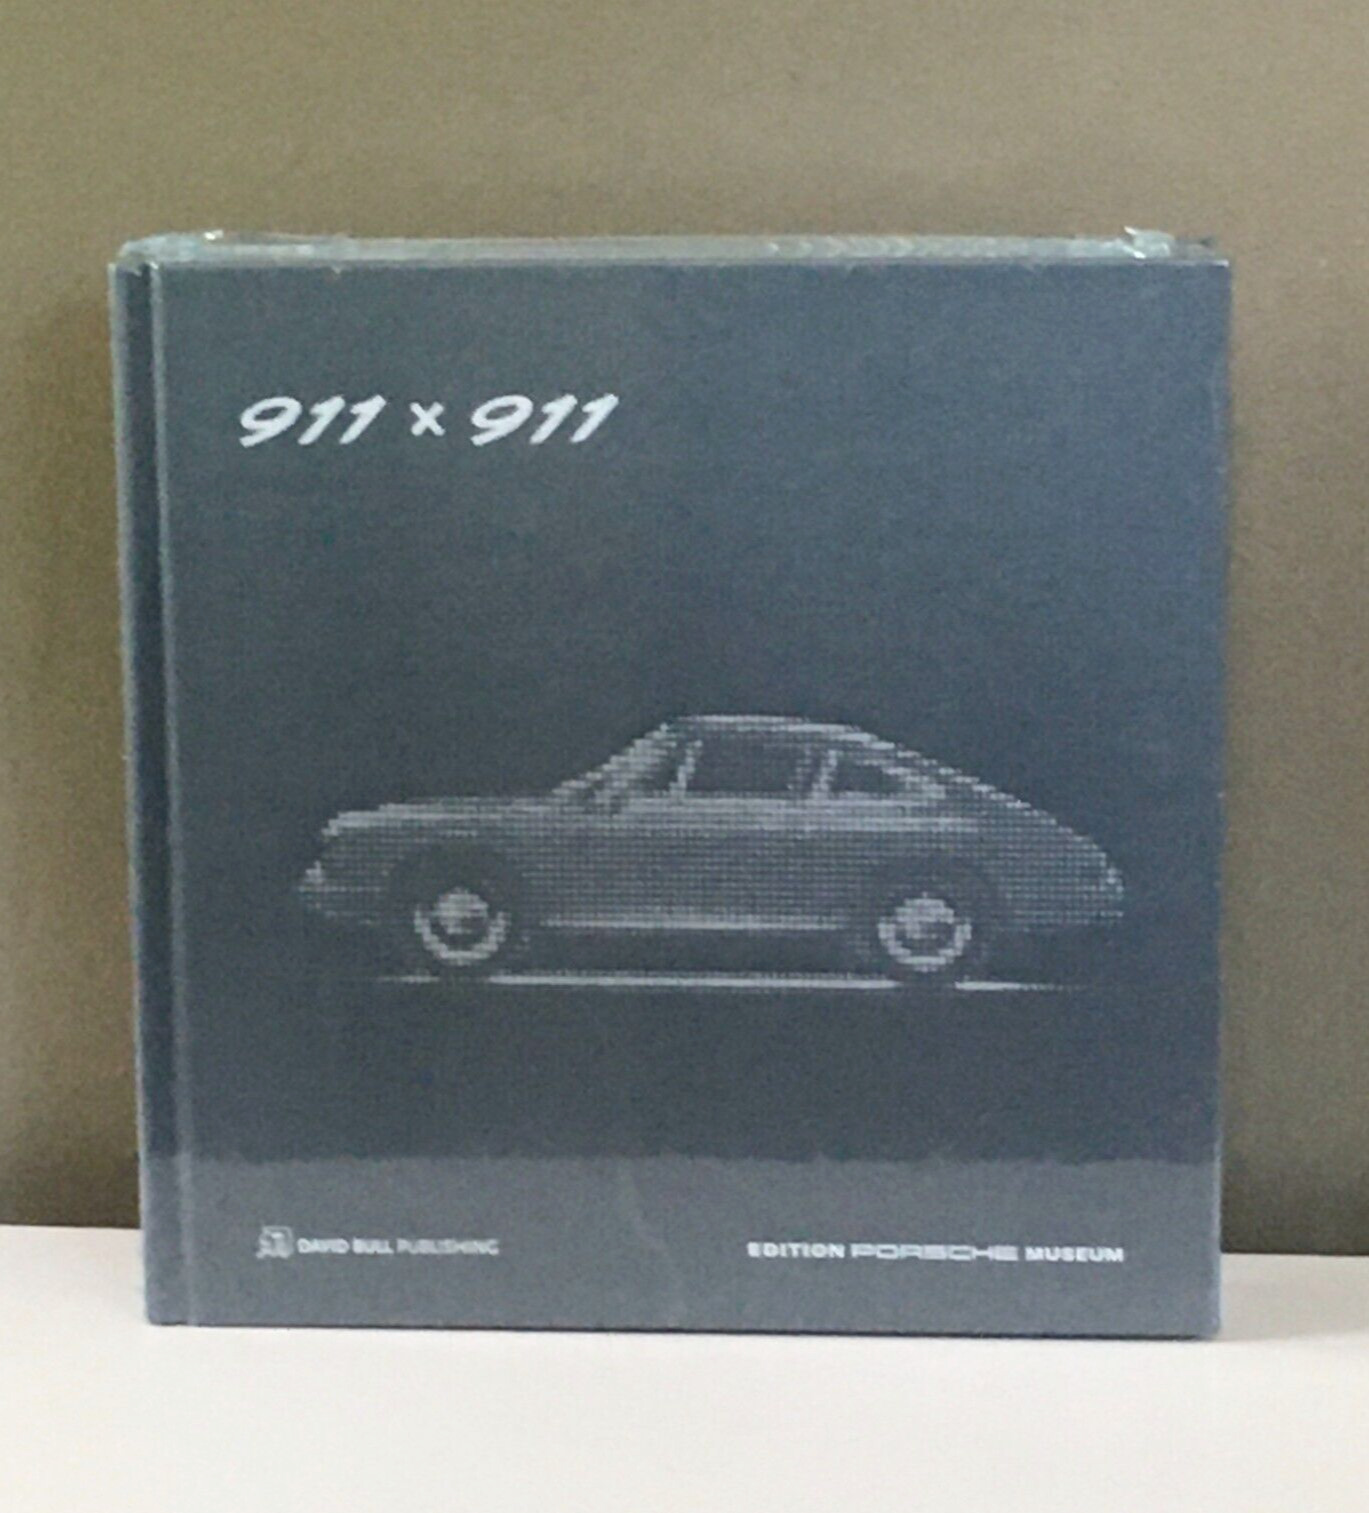 911 x 911: The official anniversary book celebrating 50 years of the Porsche 911